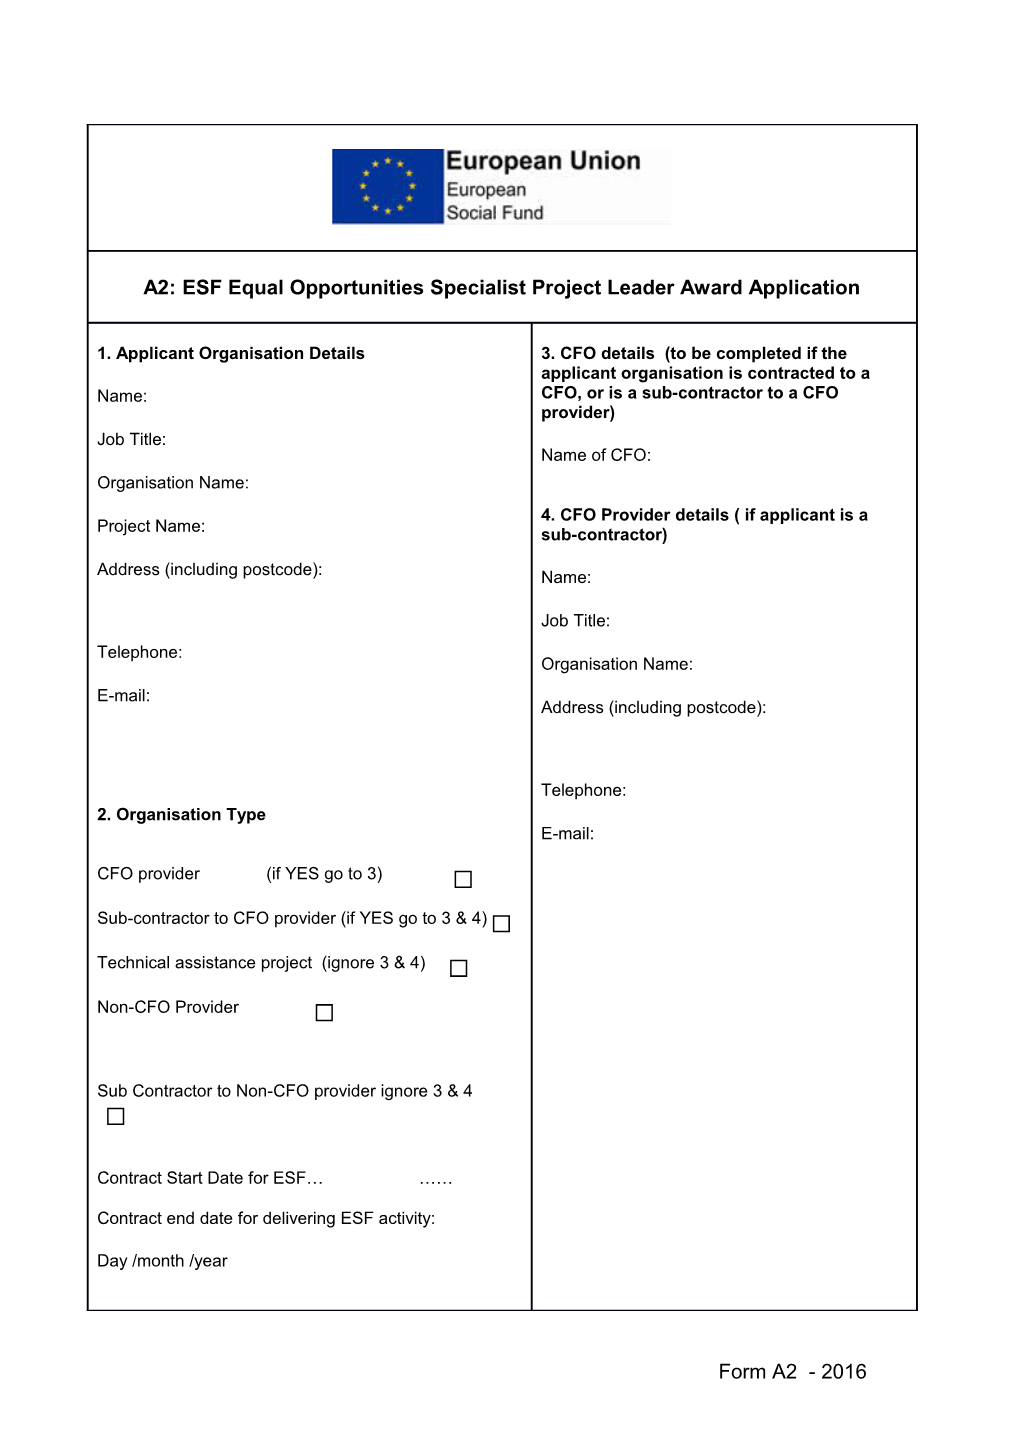 A2: ESF Equal Opportunities Specialist Project Leader Award Application